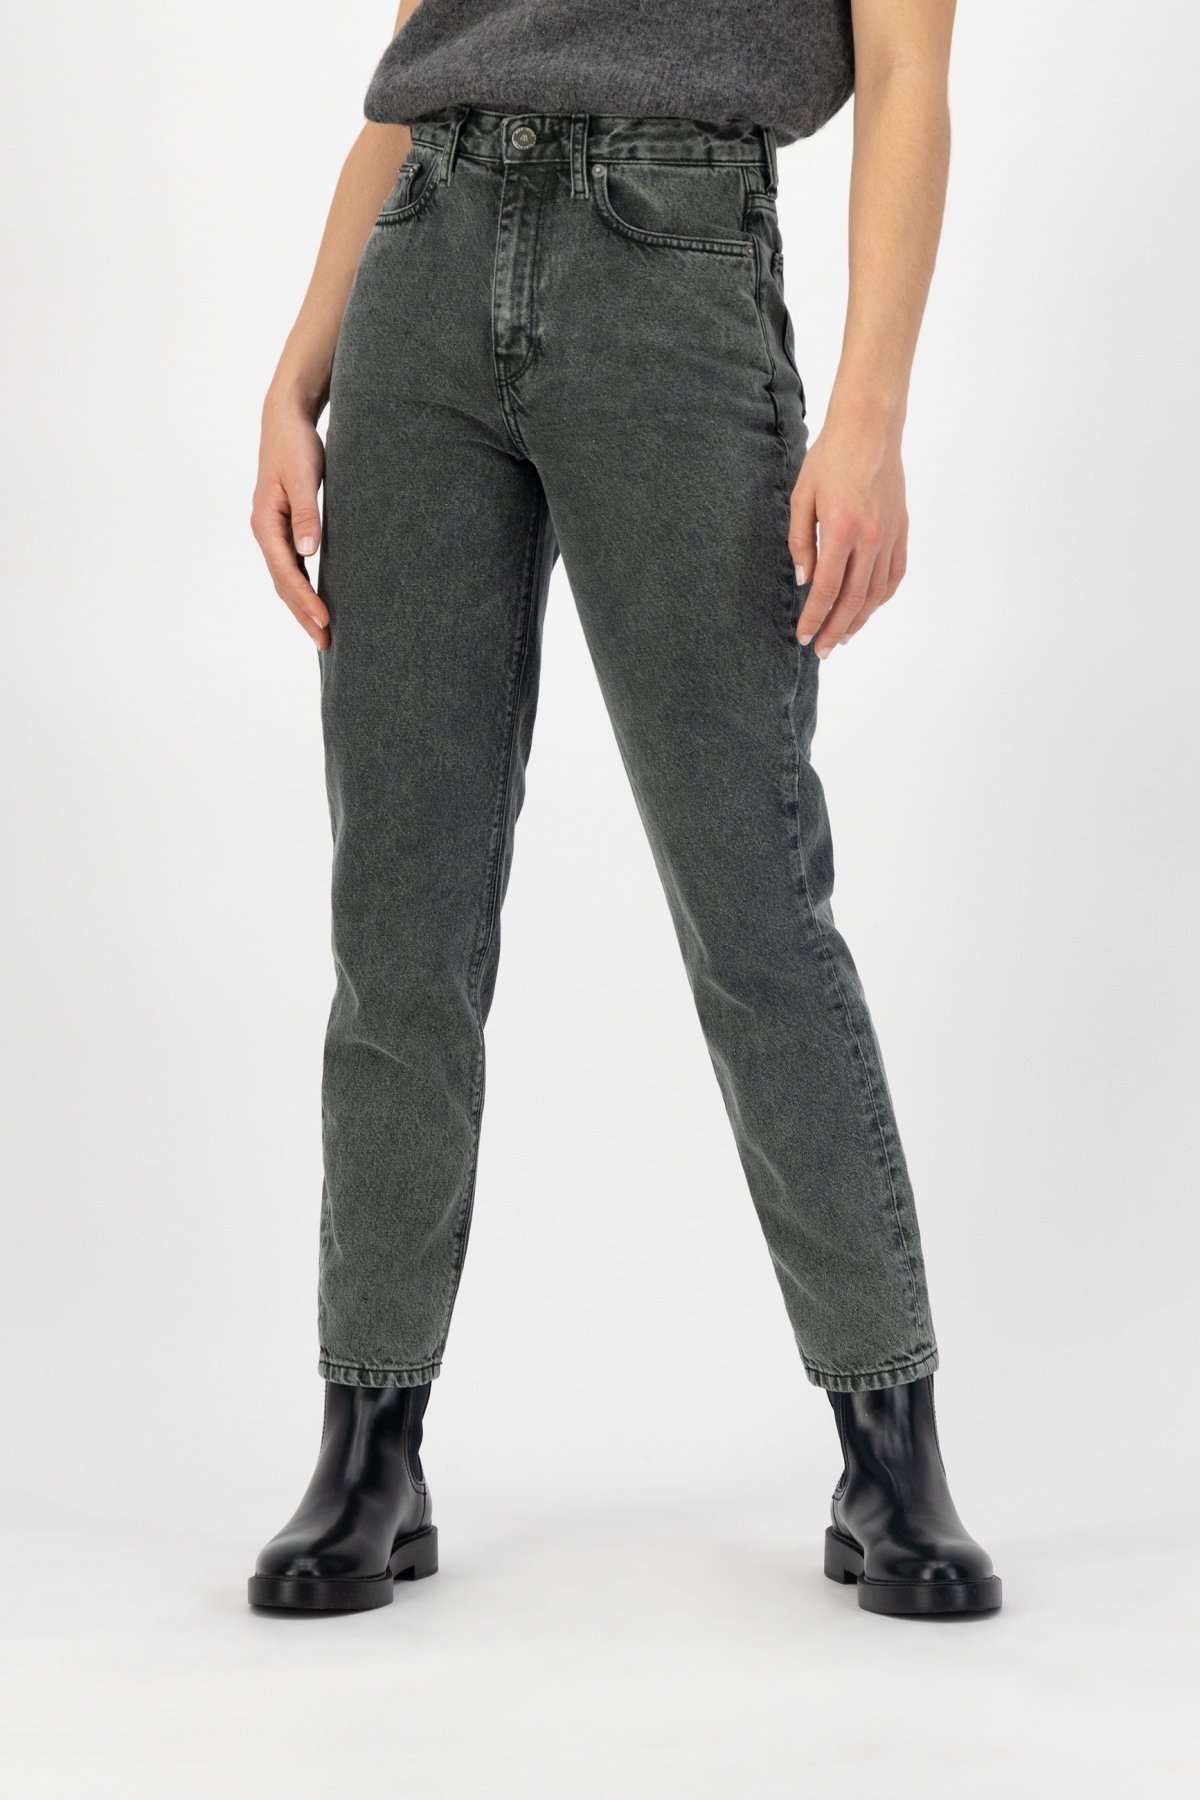 MUD Jeans dames vegan Mom Tapered Jeans Forest Groen product